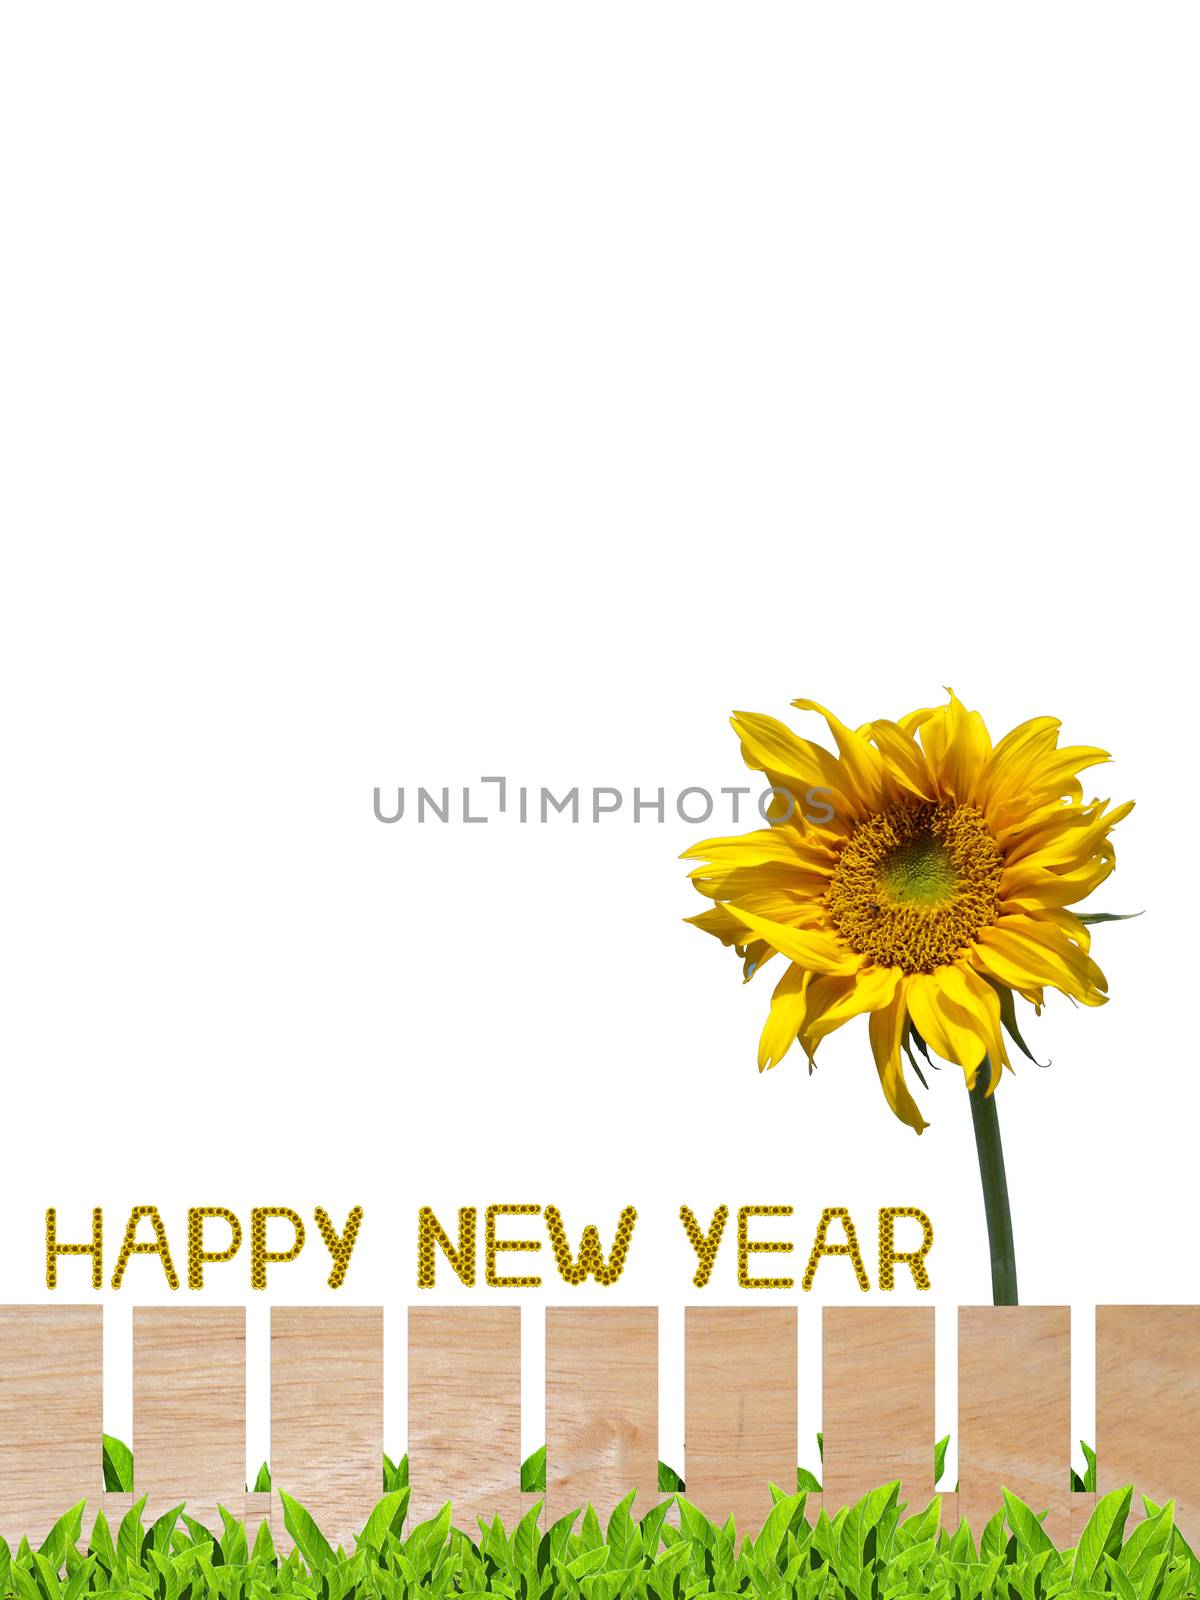 Beautiful garden fence with sunflower letter arrange in the words Happy New Year, clipping path included.